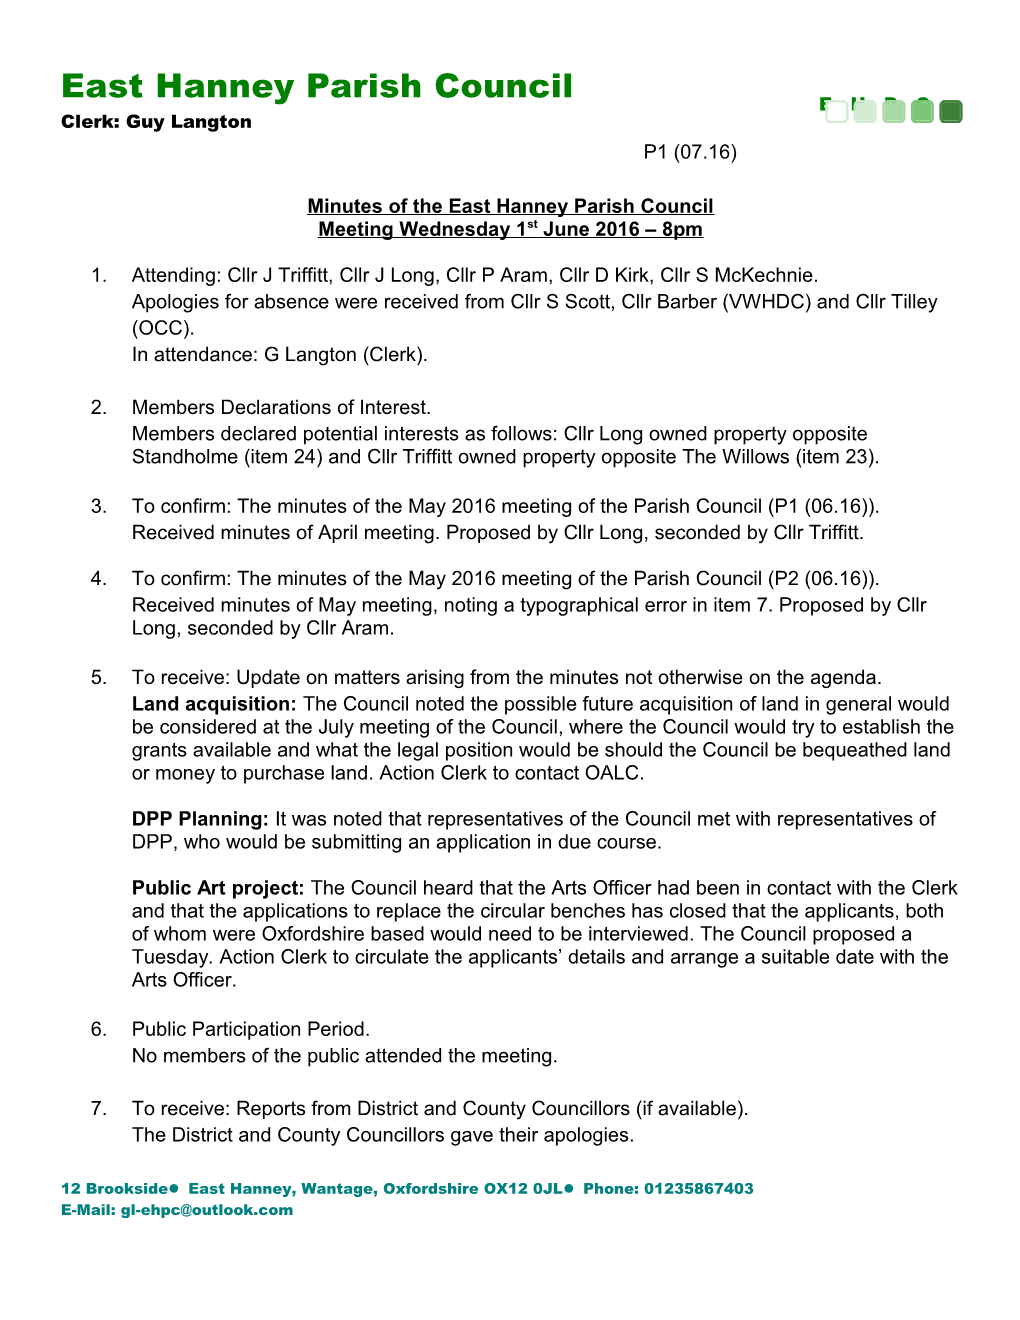 Minutes of the East Hanney Parish Council